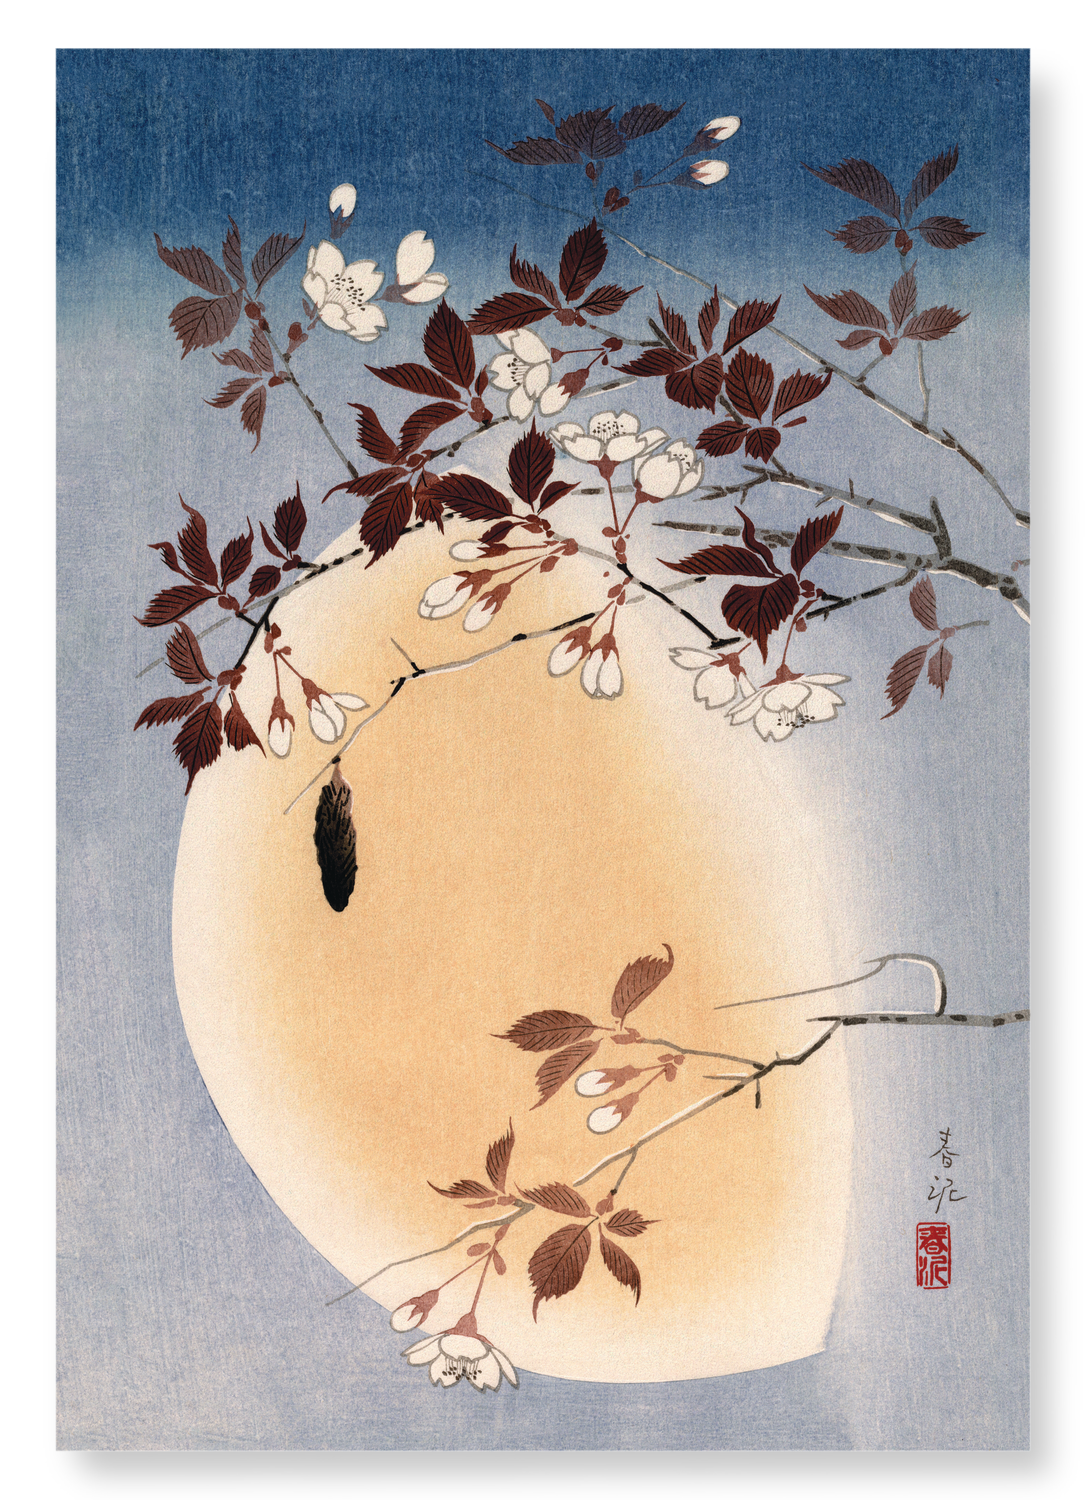 BLOSSOMS AND MOON